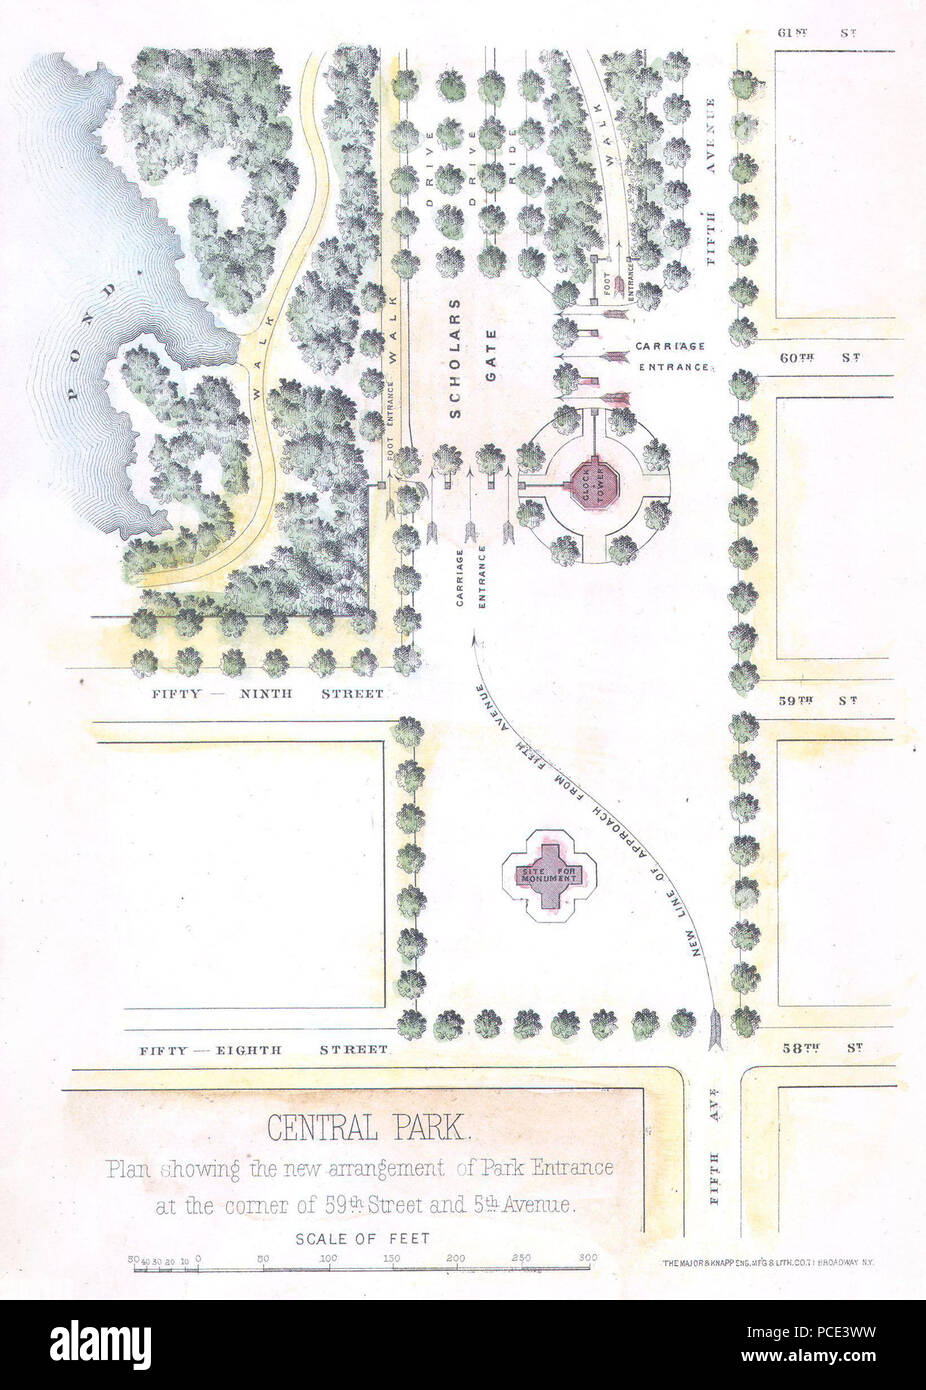 9 1869 Knapp Map of the Southeast Corner of Central Park (Grand Army Plaza) New York City - Geographicus - CentralParkSW-centralpark-1869 Stock Photo